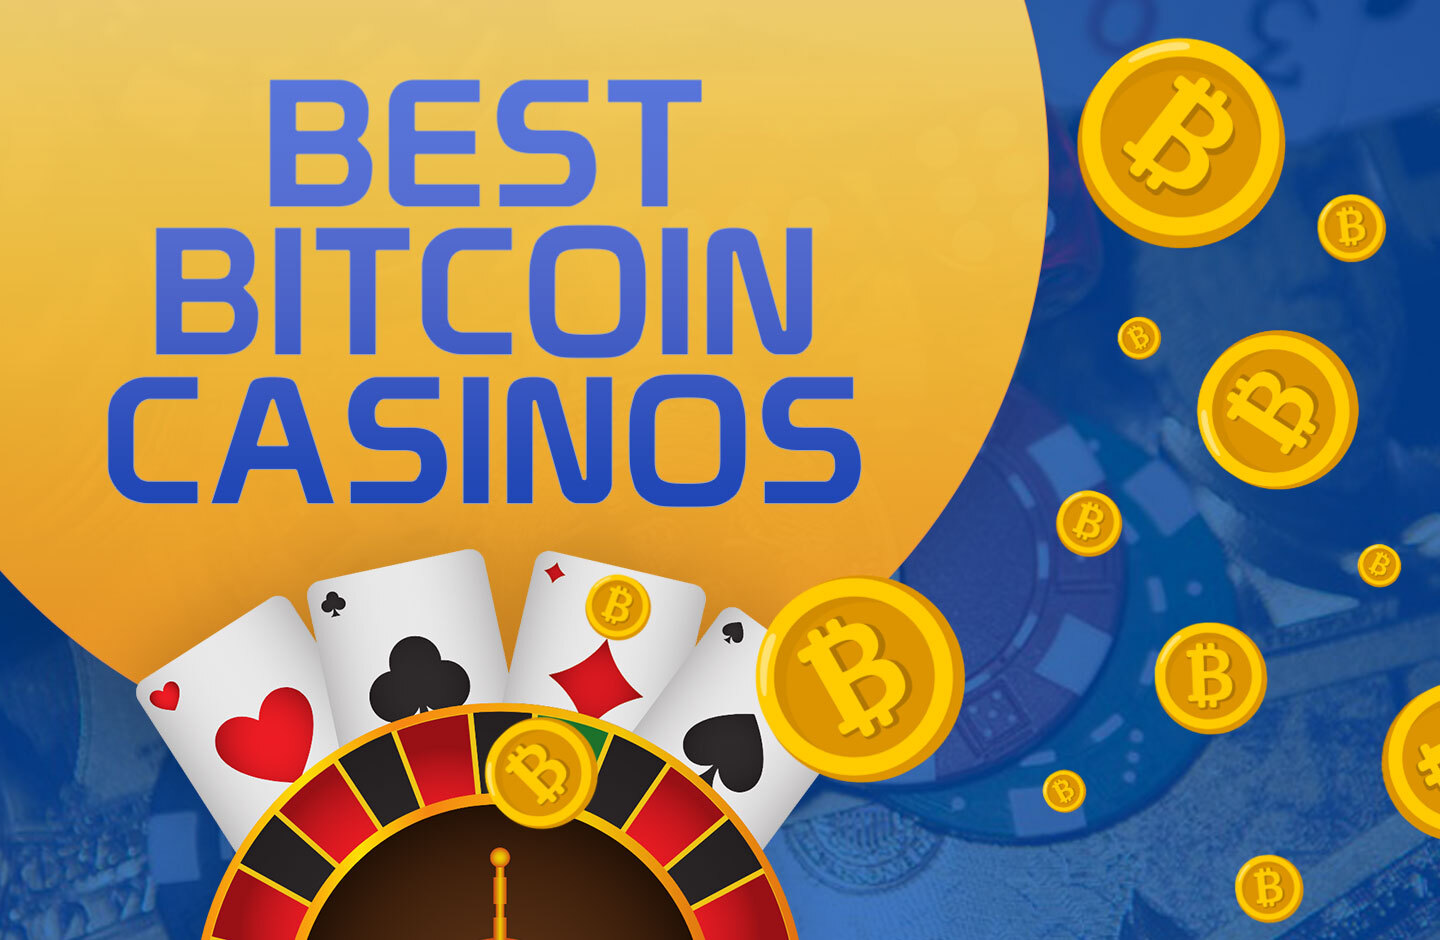 Does Your Bitcoin Casinos Goals Match Your Practices?